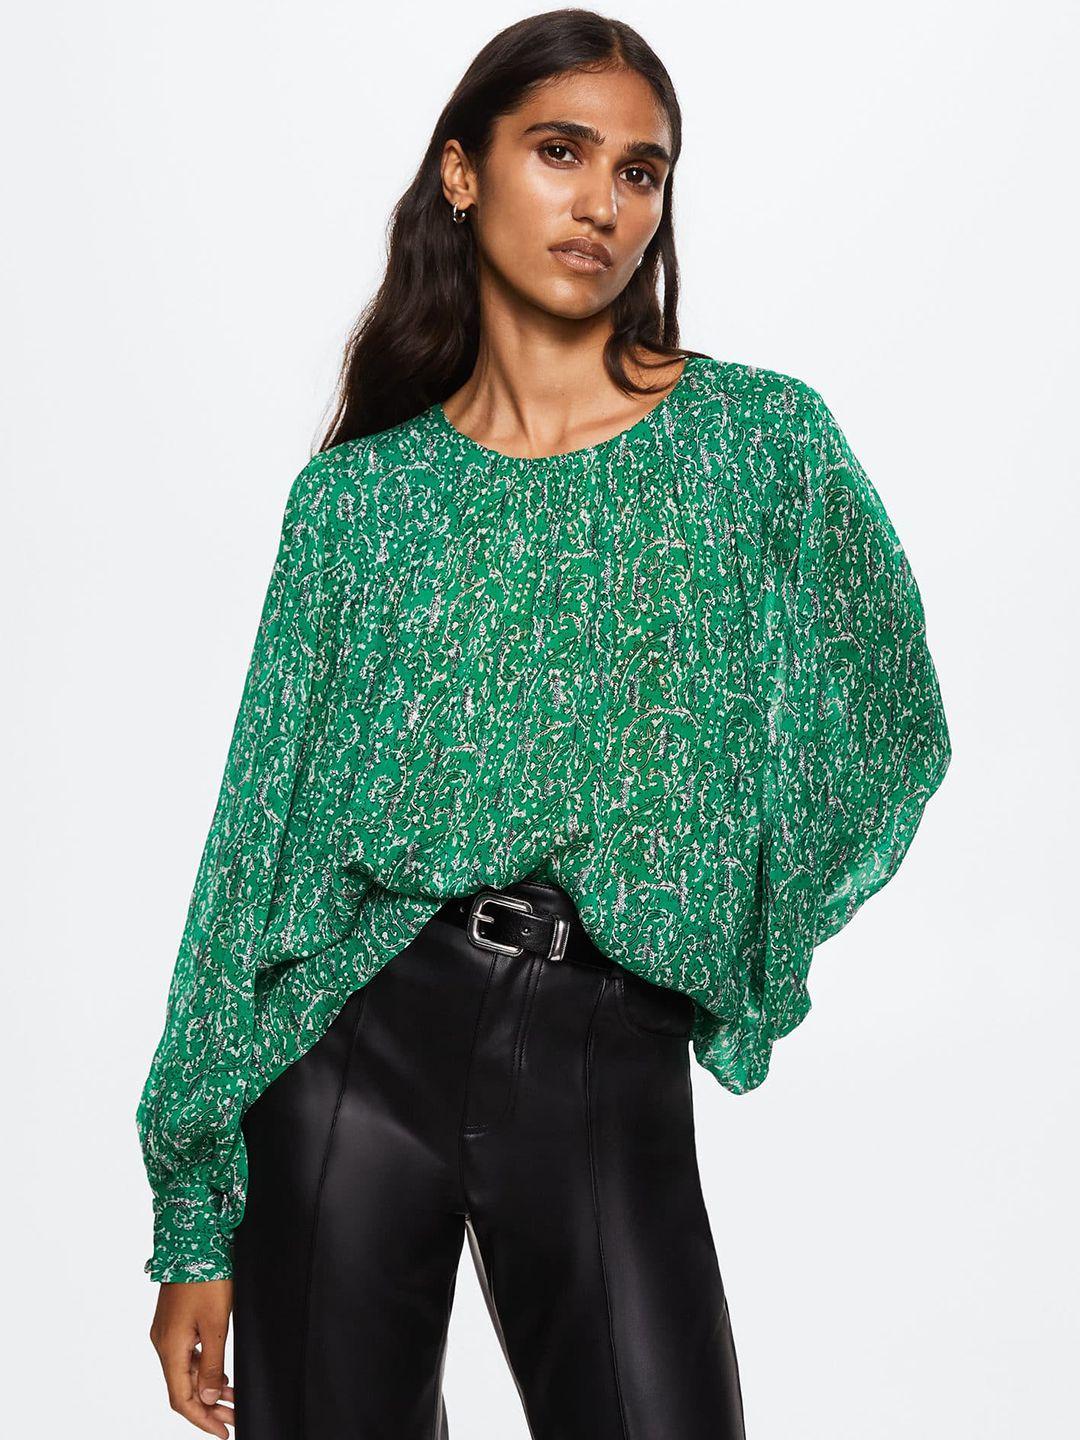 mango women green & white floral print sustainable top